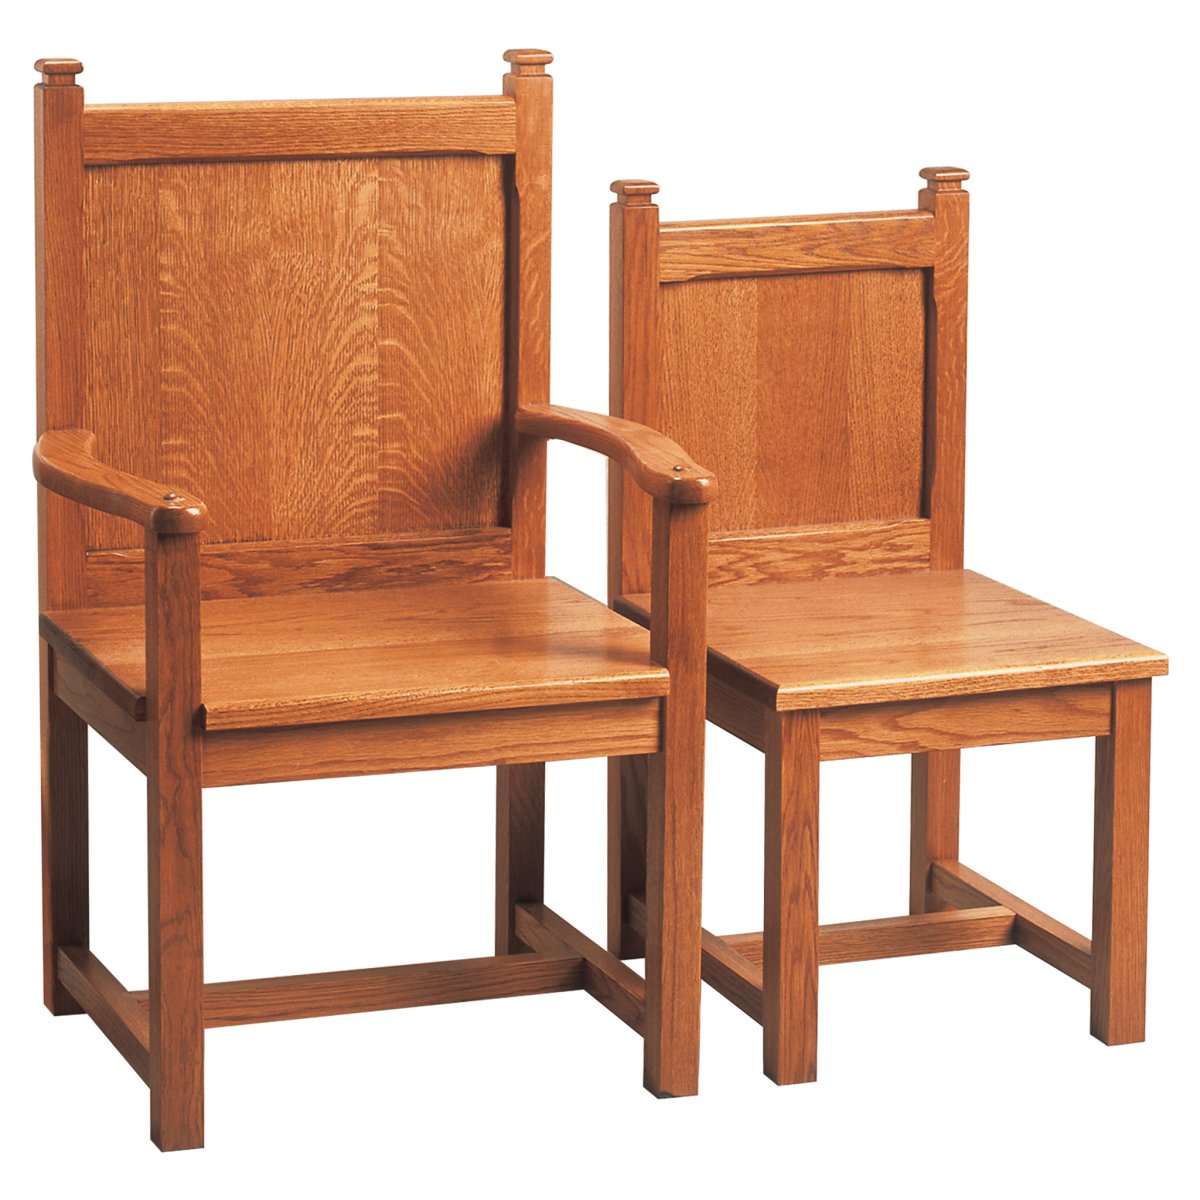 Plain Minister Chair - Hayes & Finch